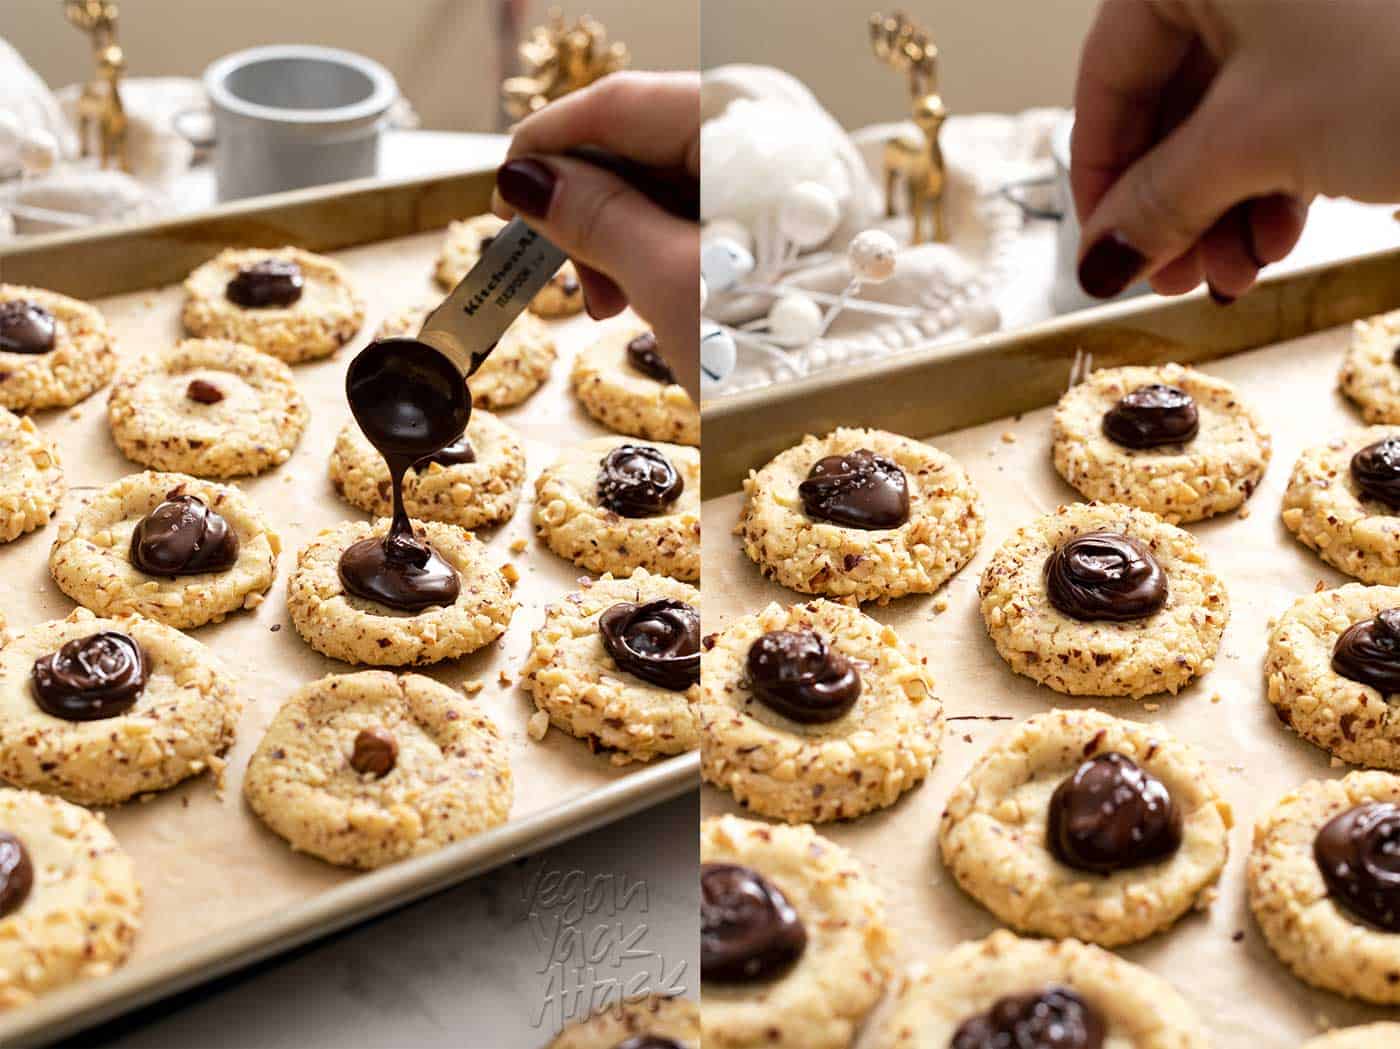 Image collage of filling thumbprint cookies with chocolate